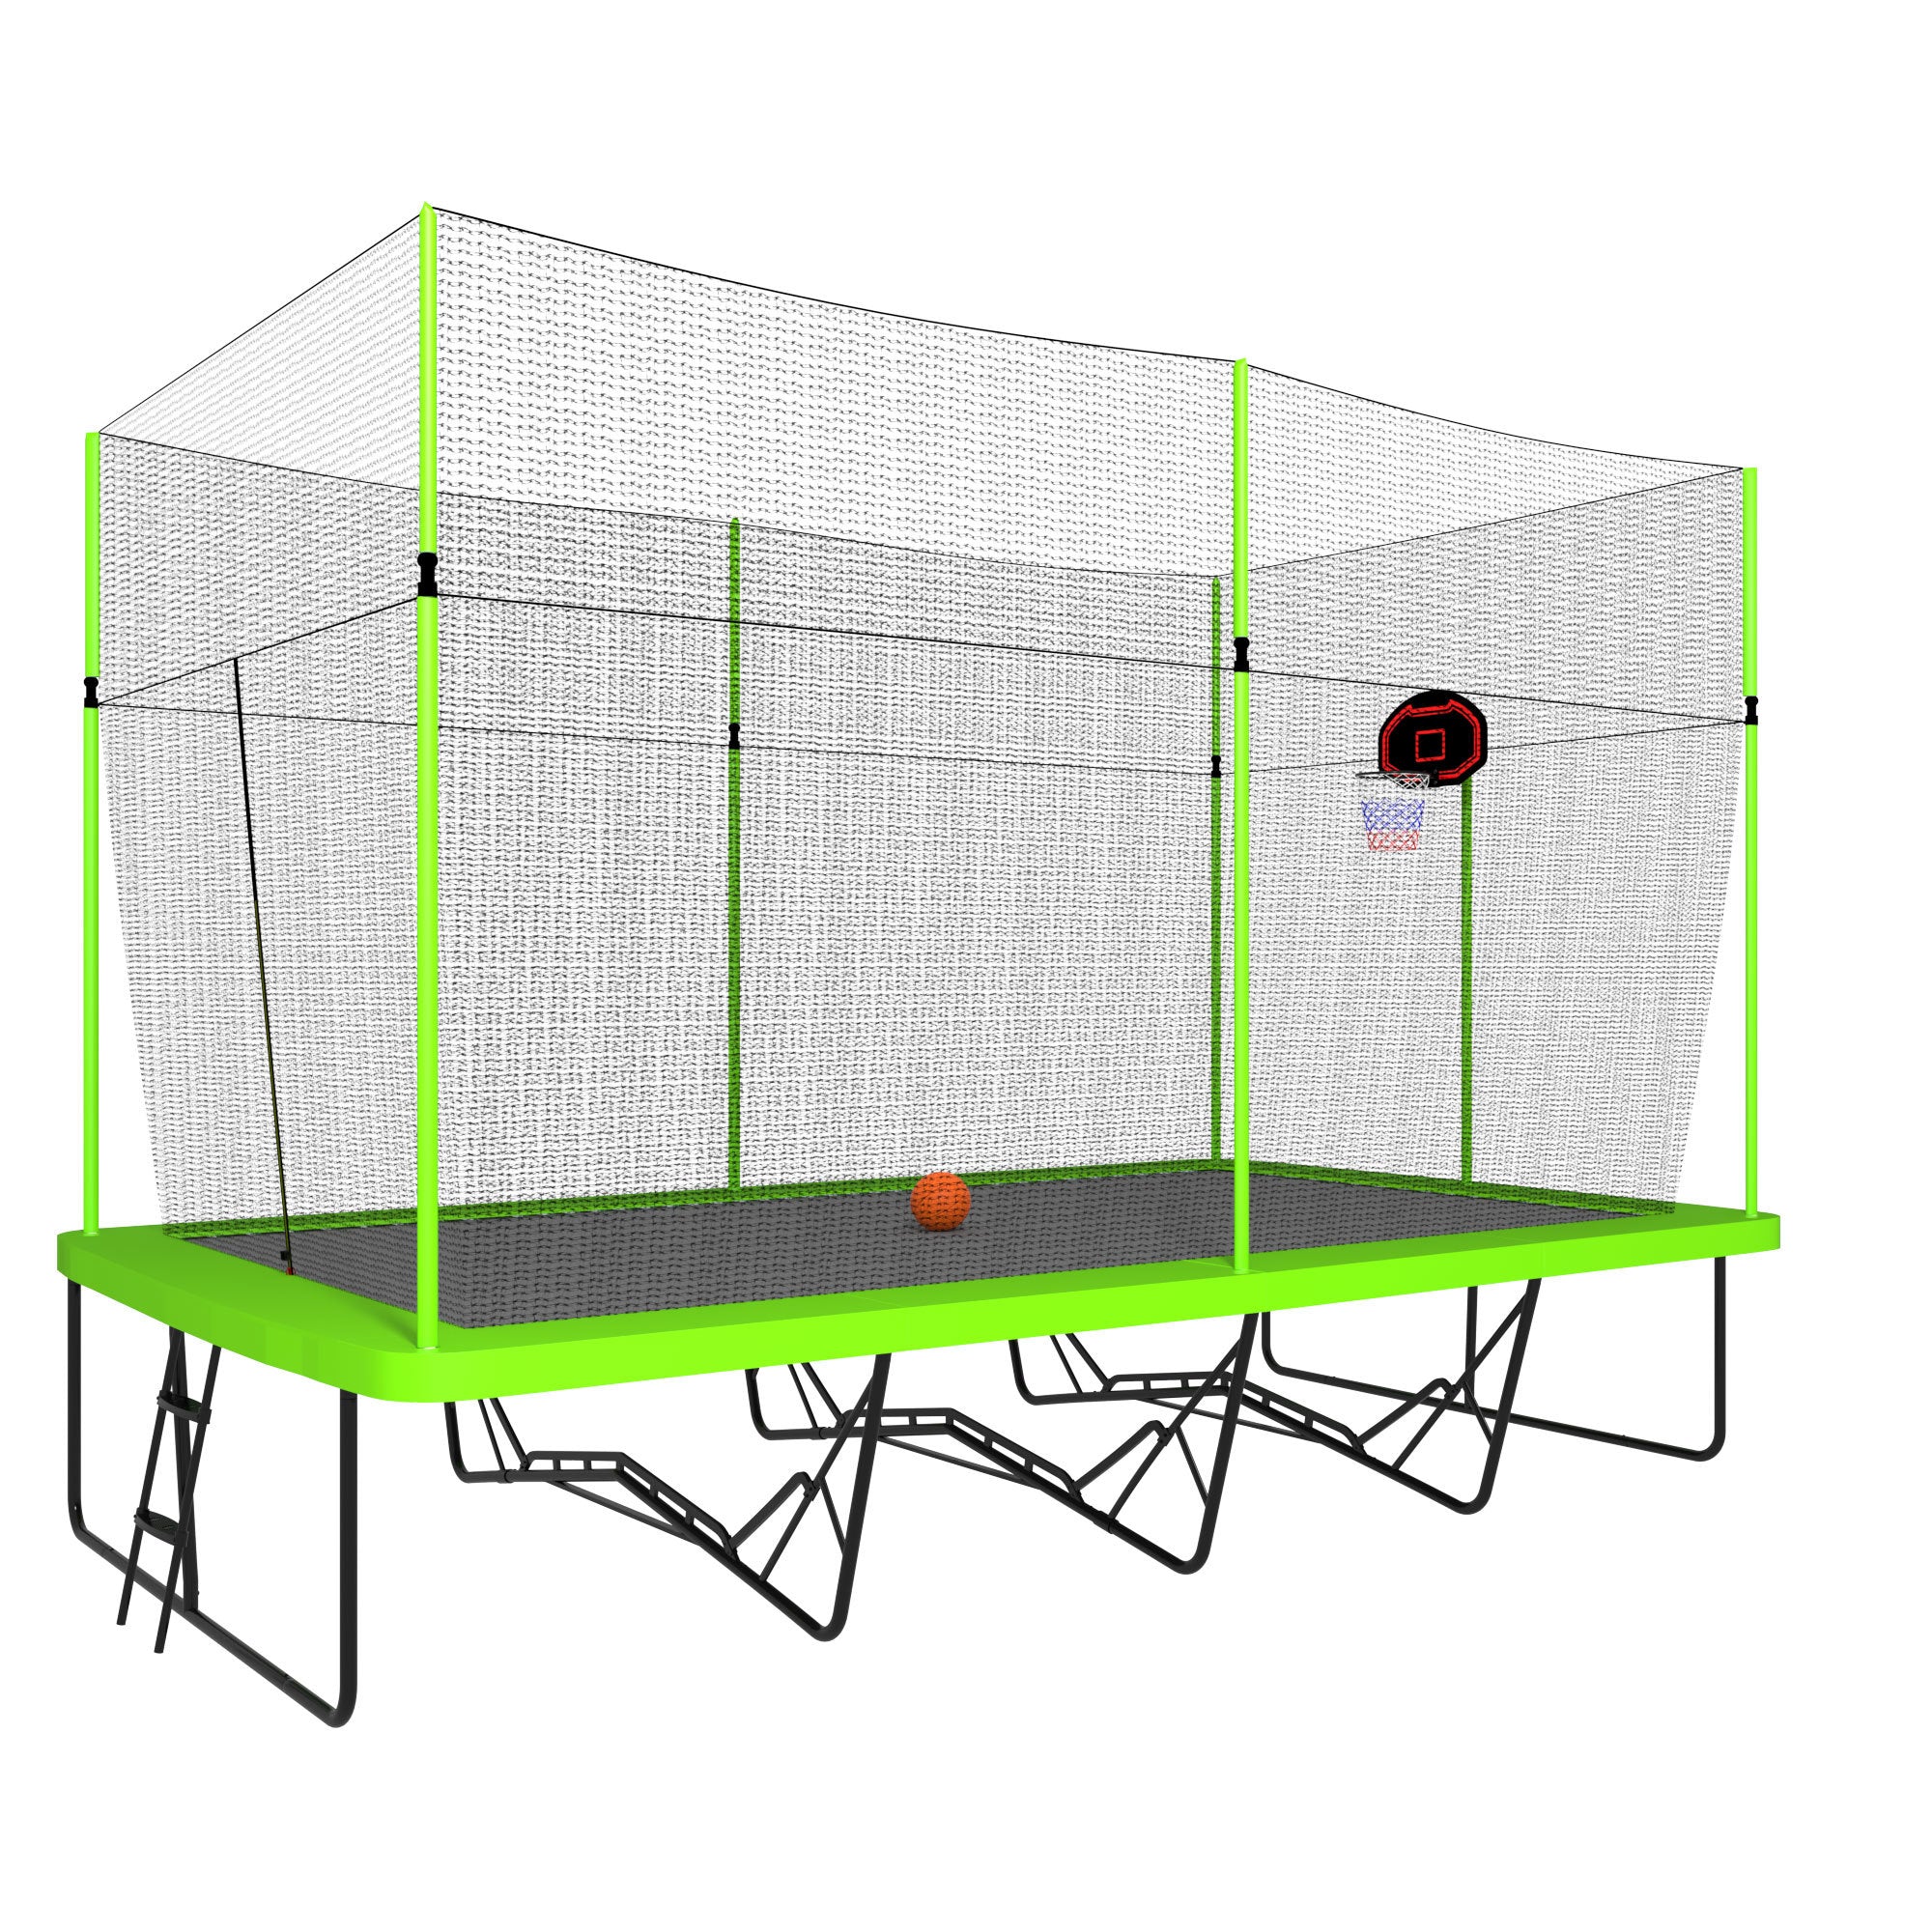 10ft by 17ft Rectangule Trampoline with Green